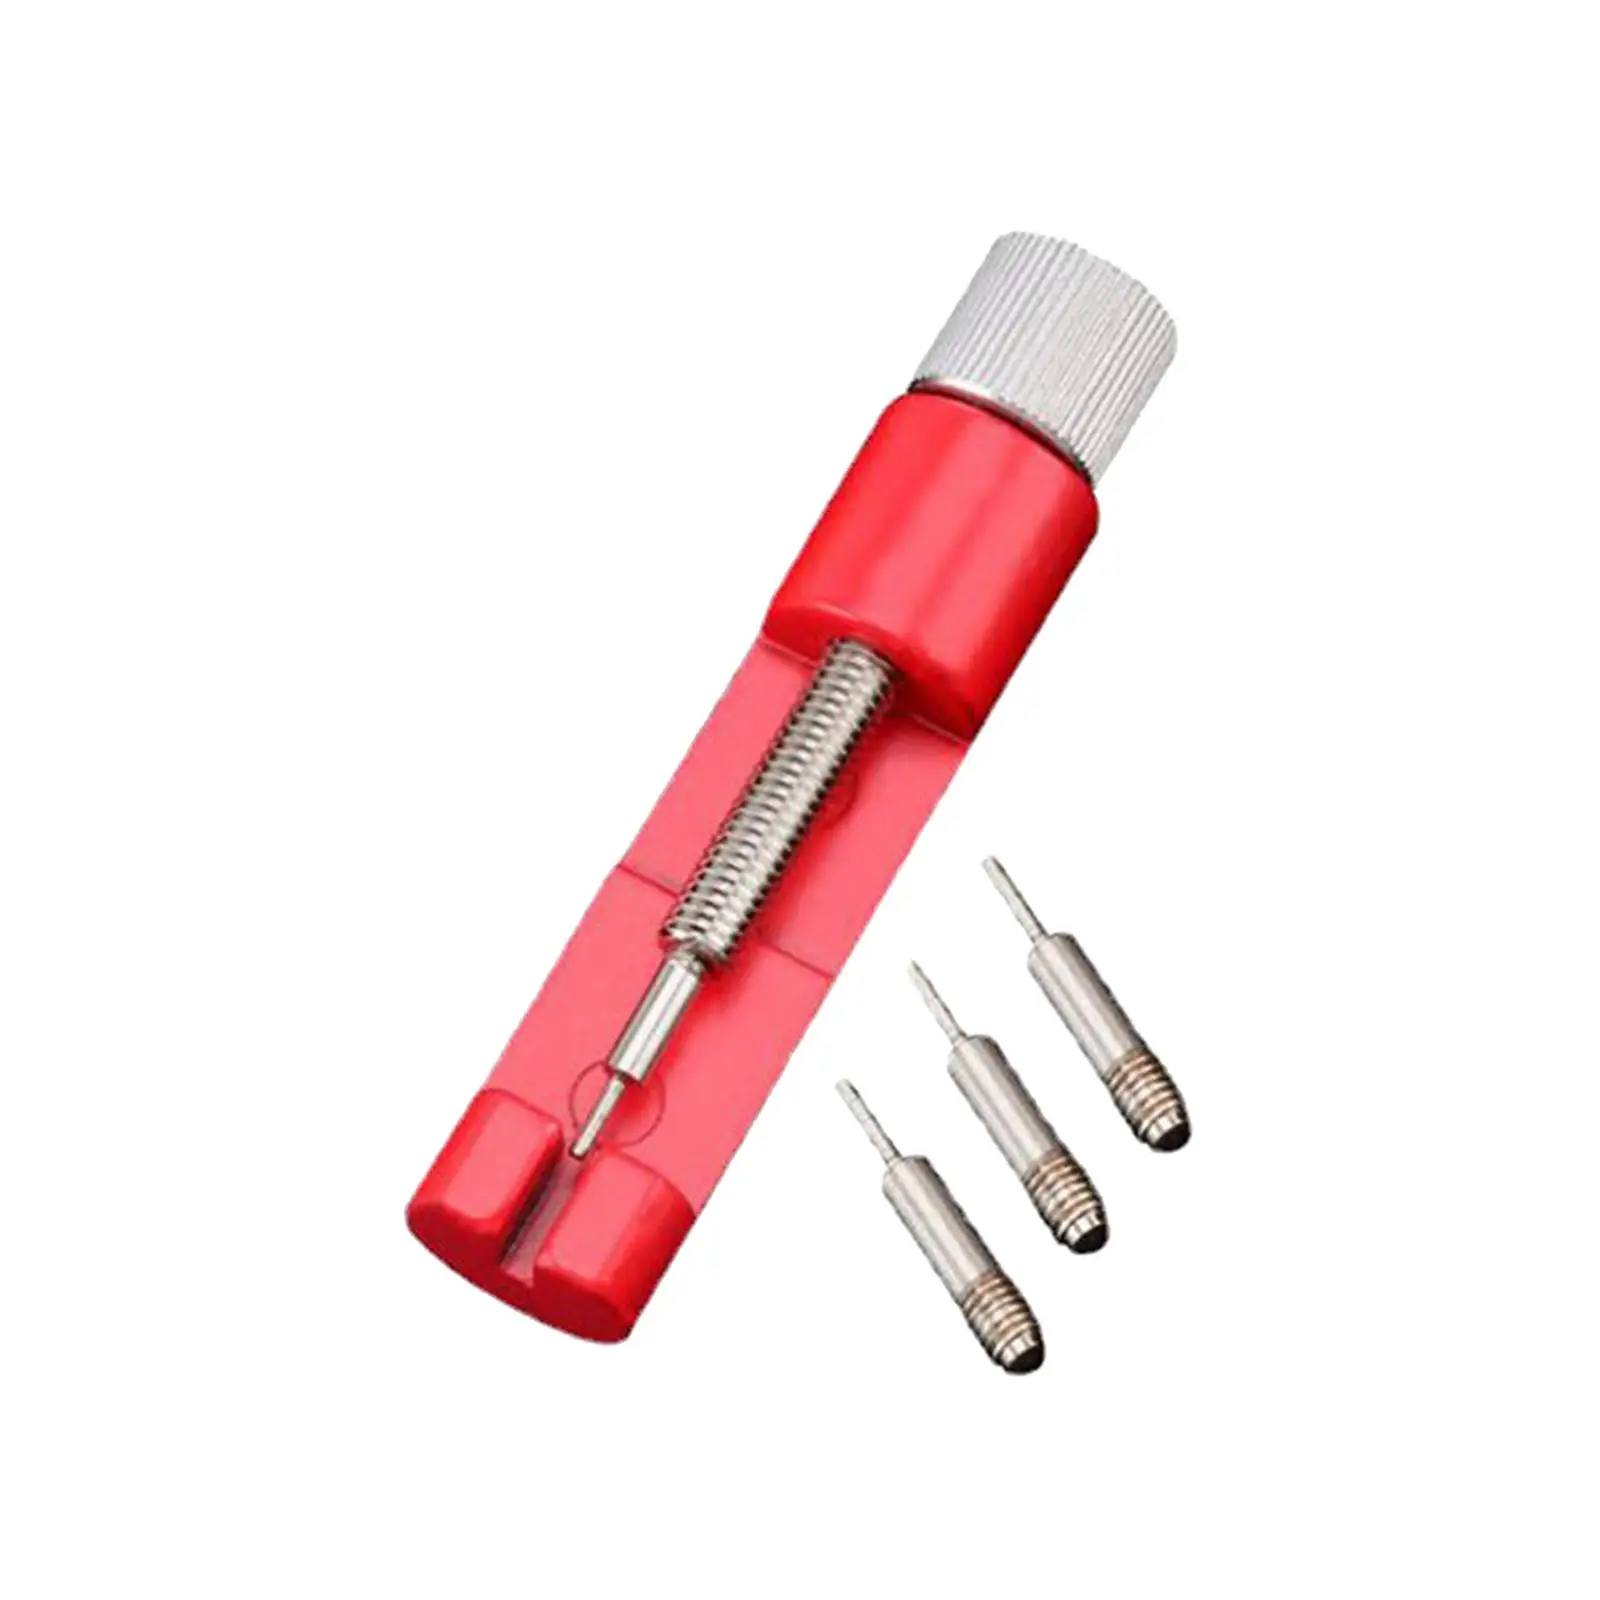 Watch Link Removal Tool Kit Watch Strap Adjustment Metal Punch pin 3 Pins Spring Bars Watch Strap Sizing Tool for Repair